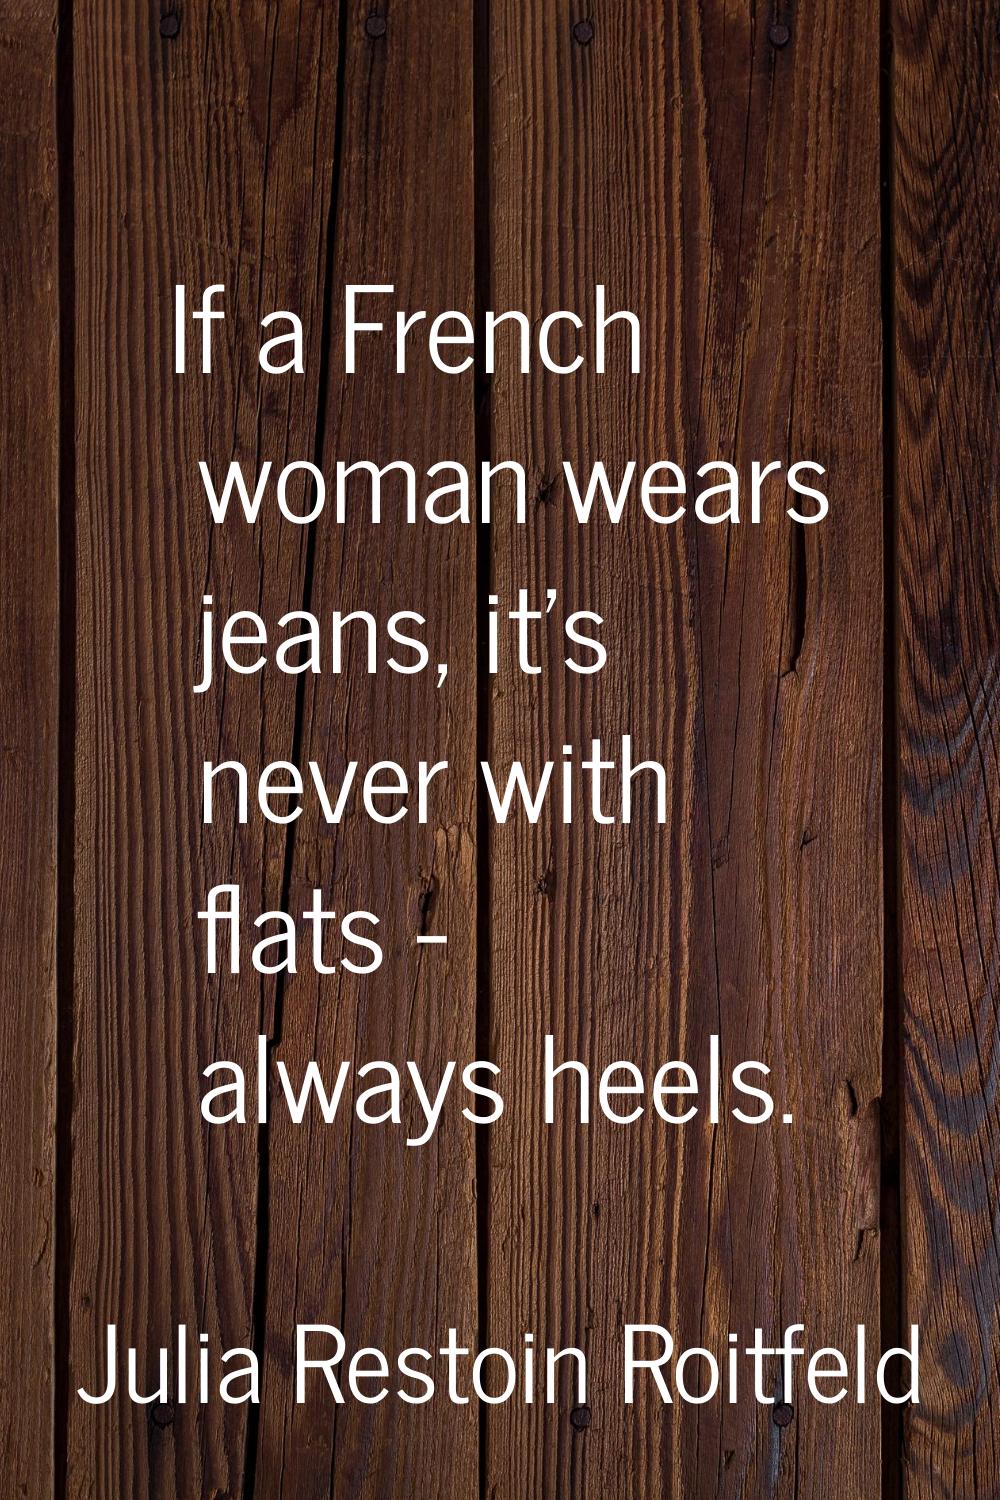 If a French woman wears jeans, it's never with flats - always heels.